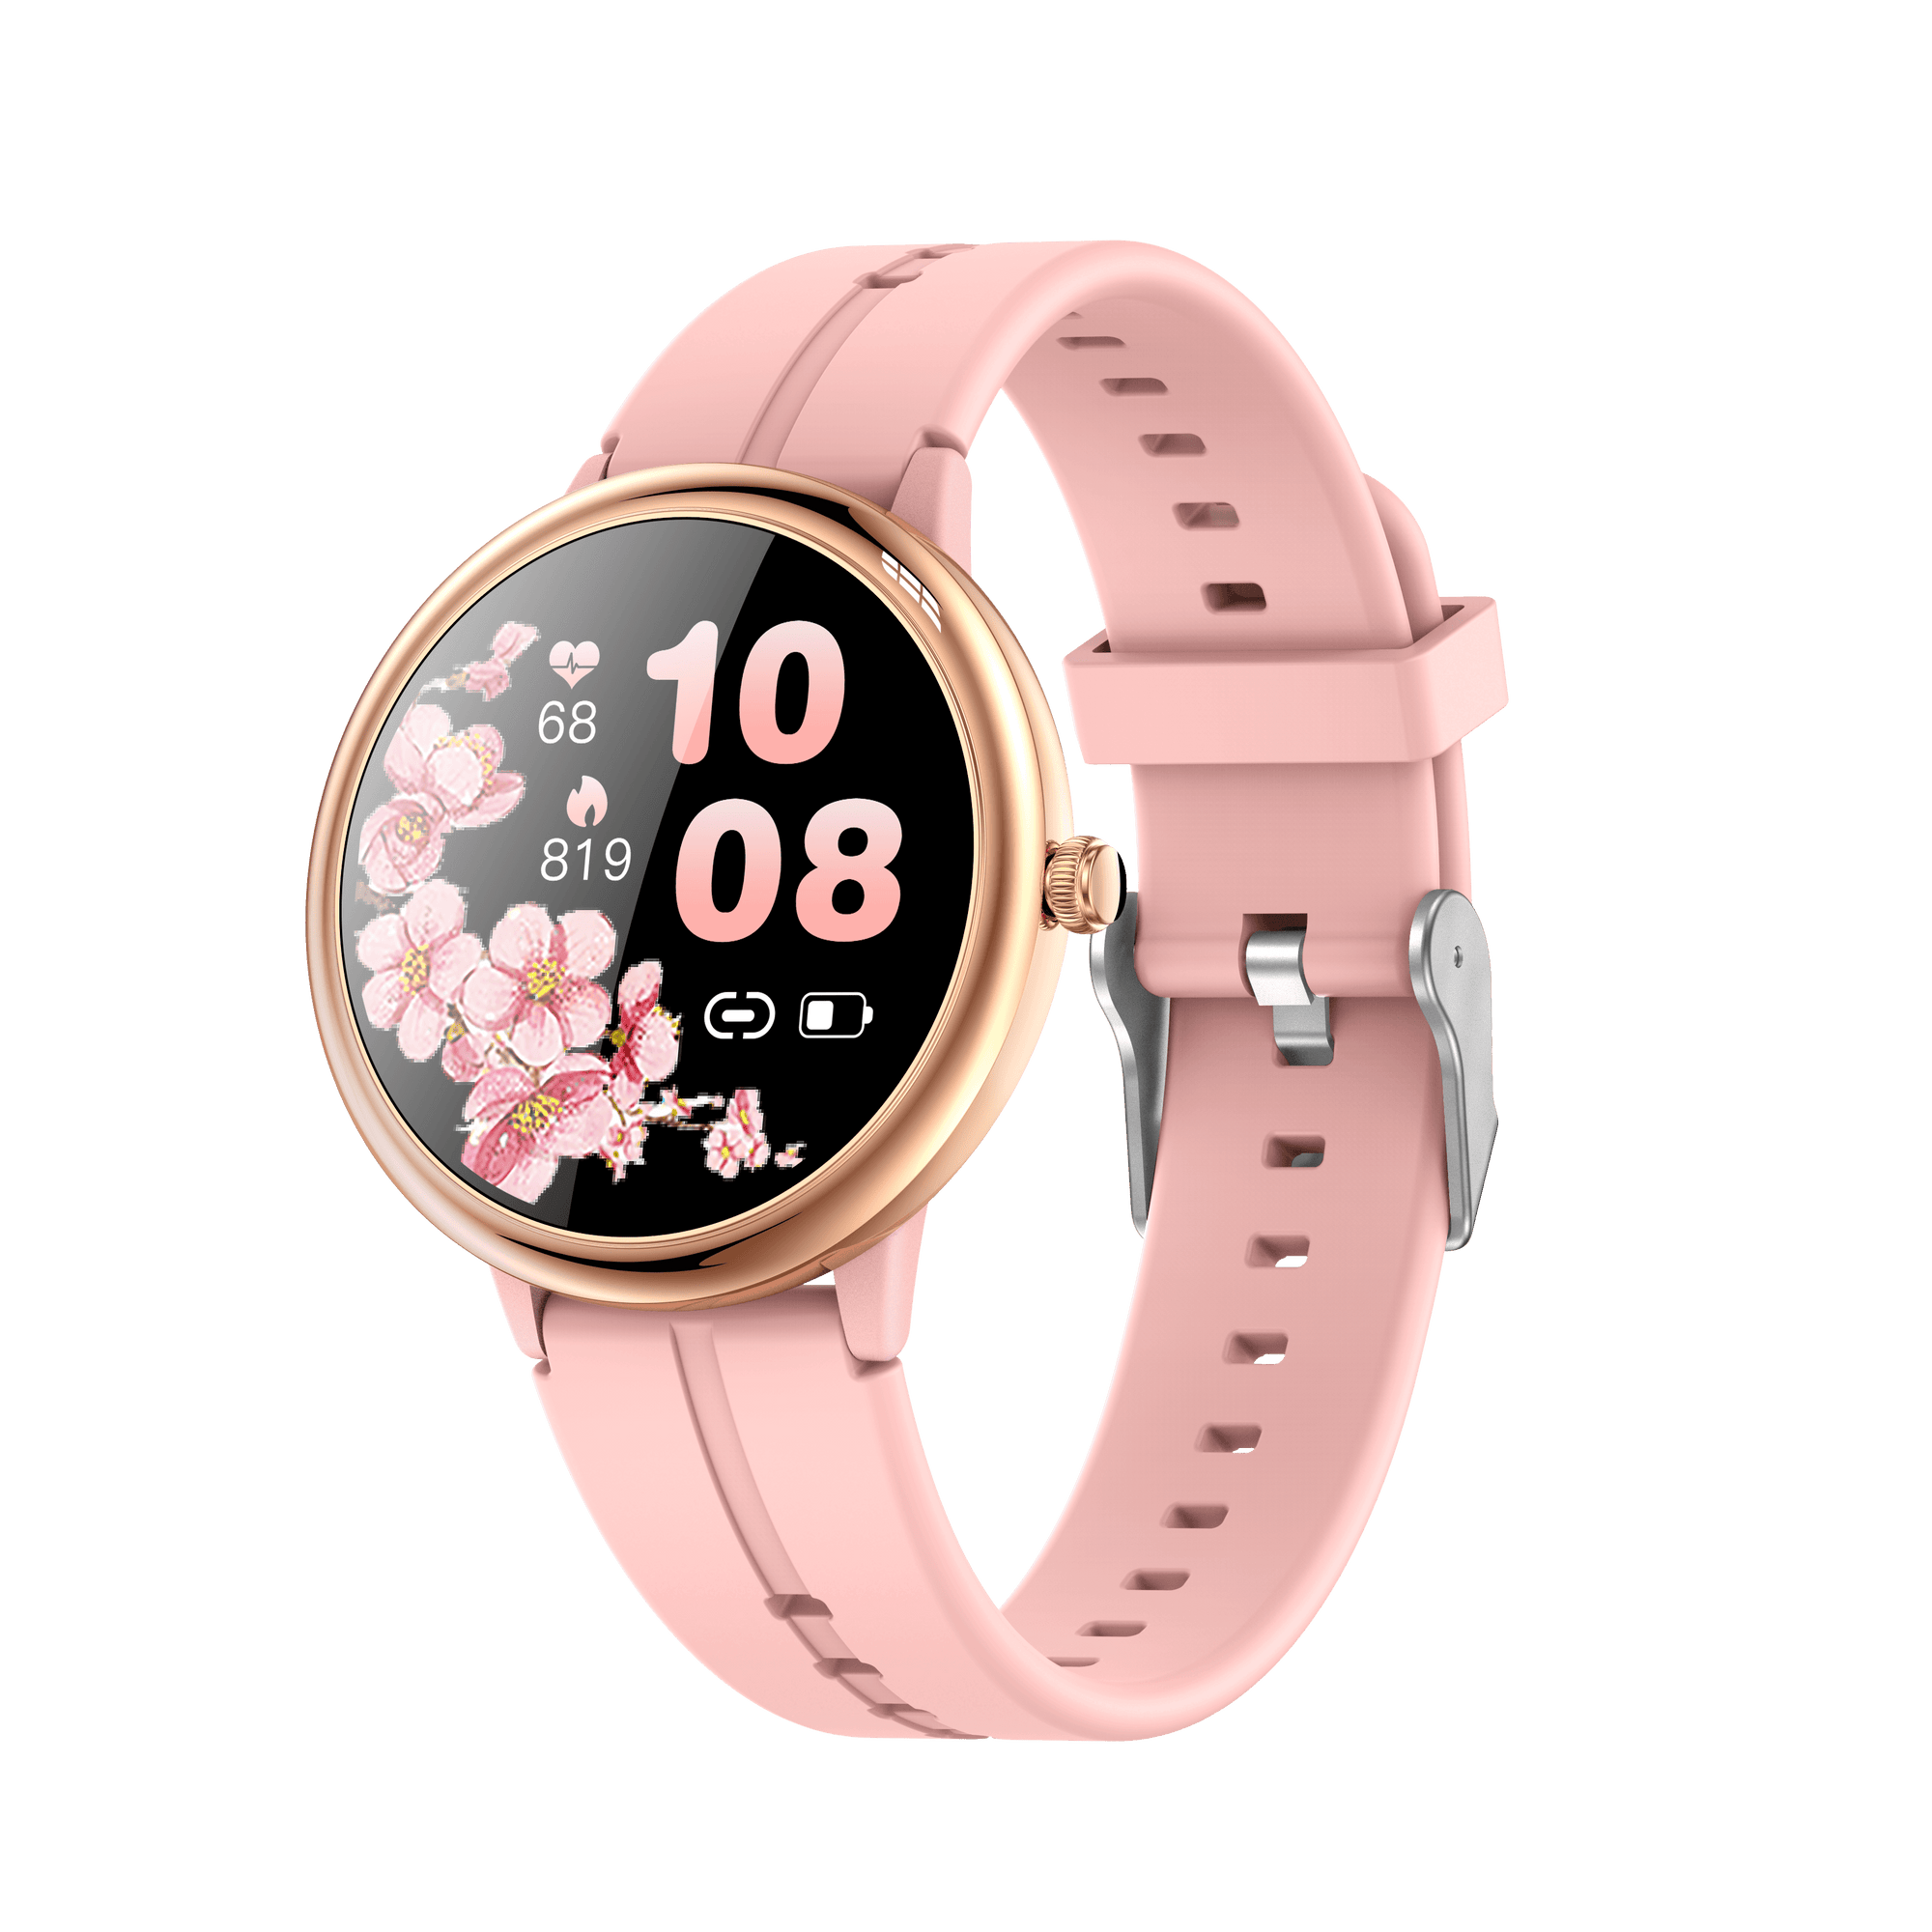 Lige BW0338 Ladies Smart/Fitness Watch - Pink - Smael South Africa